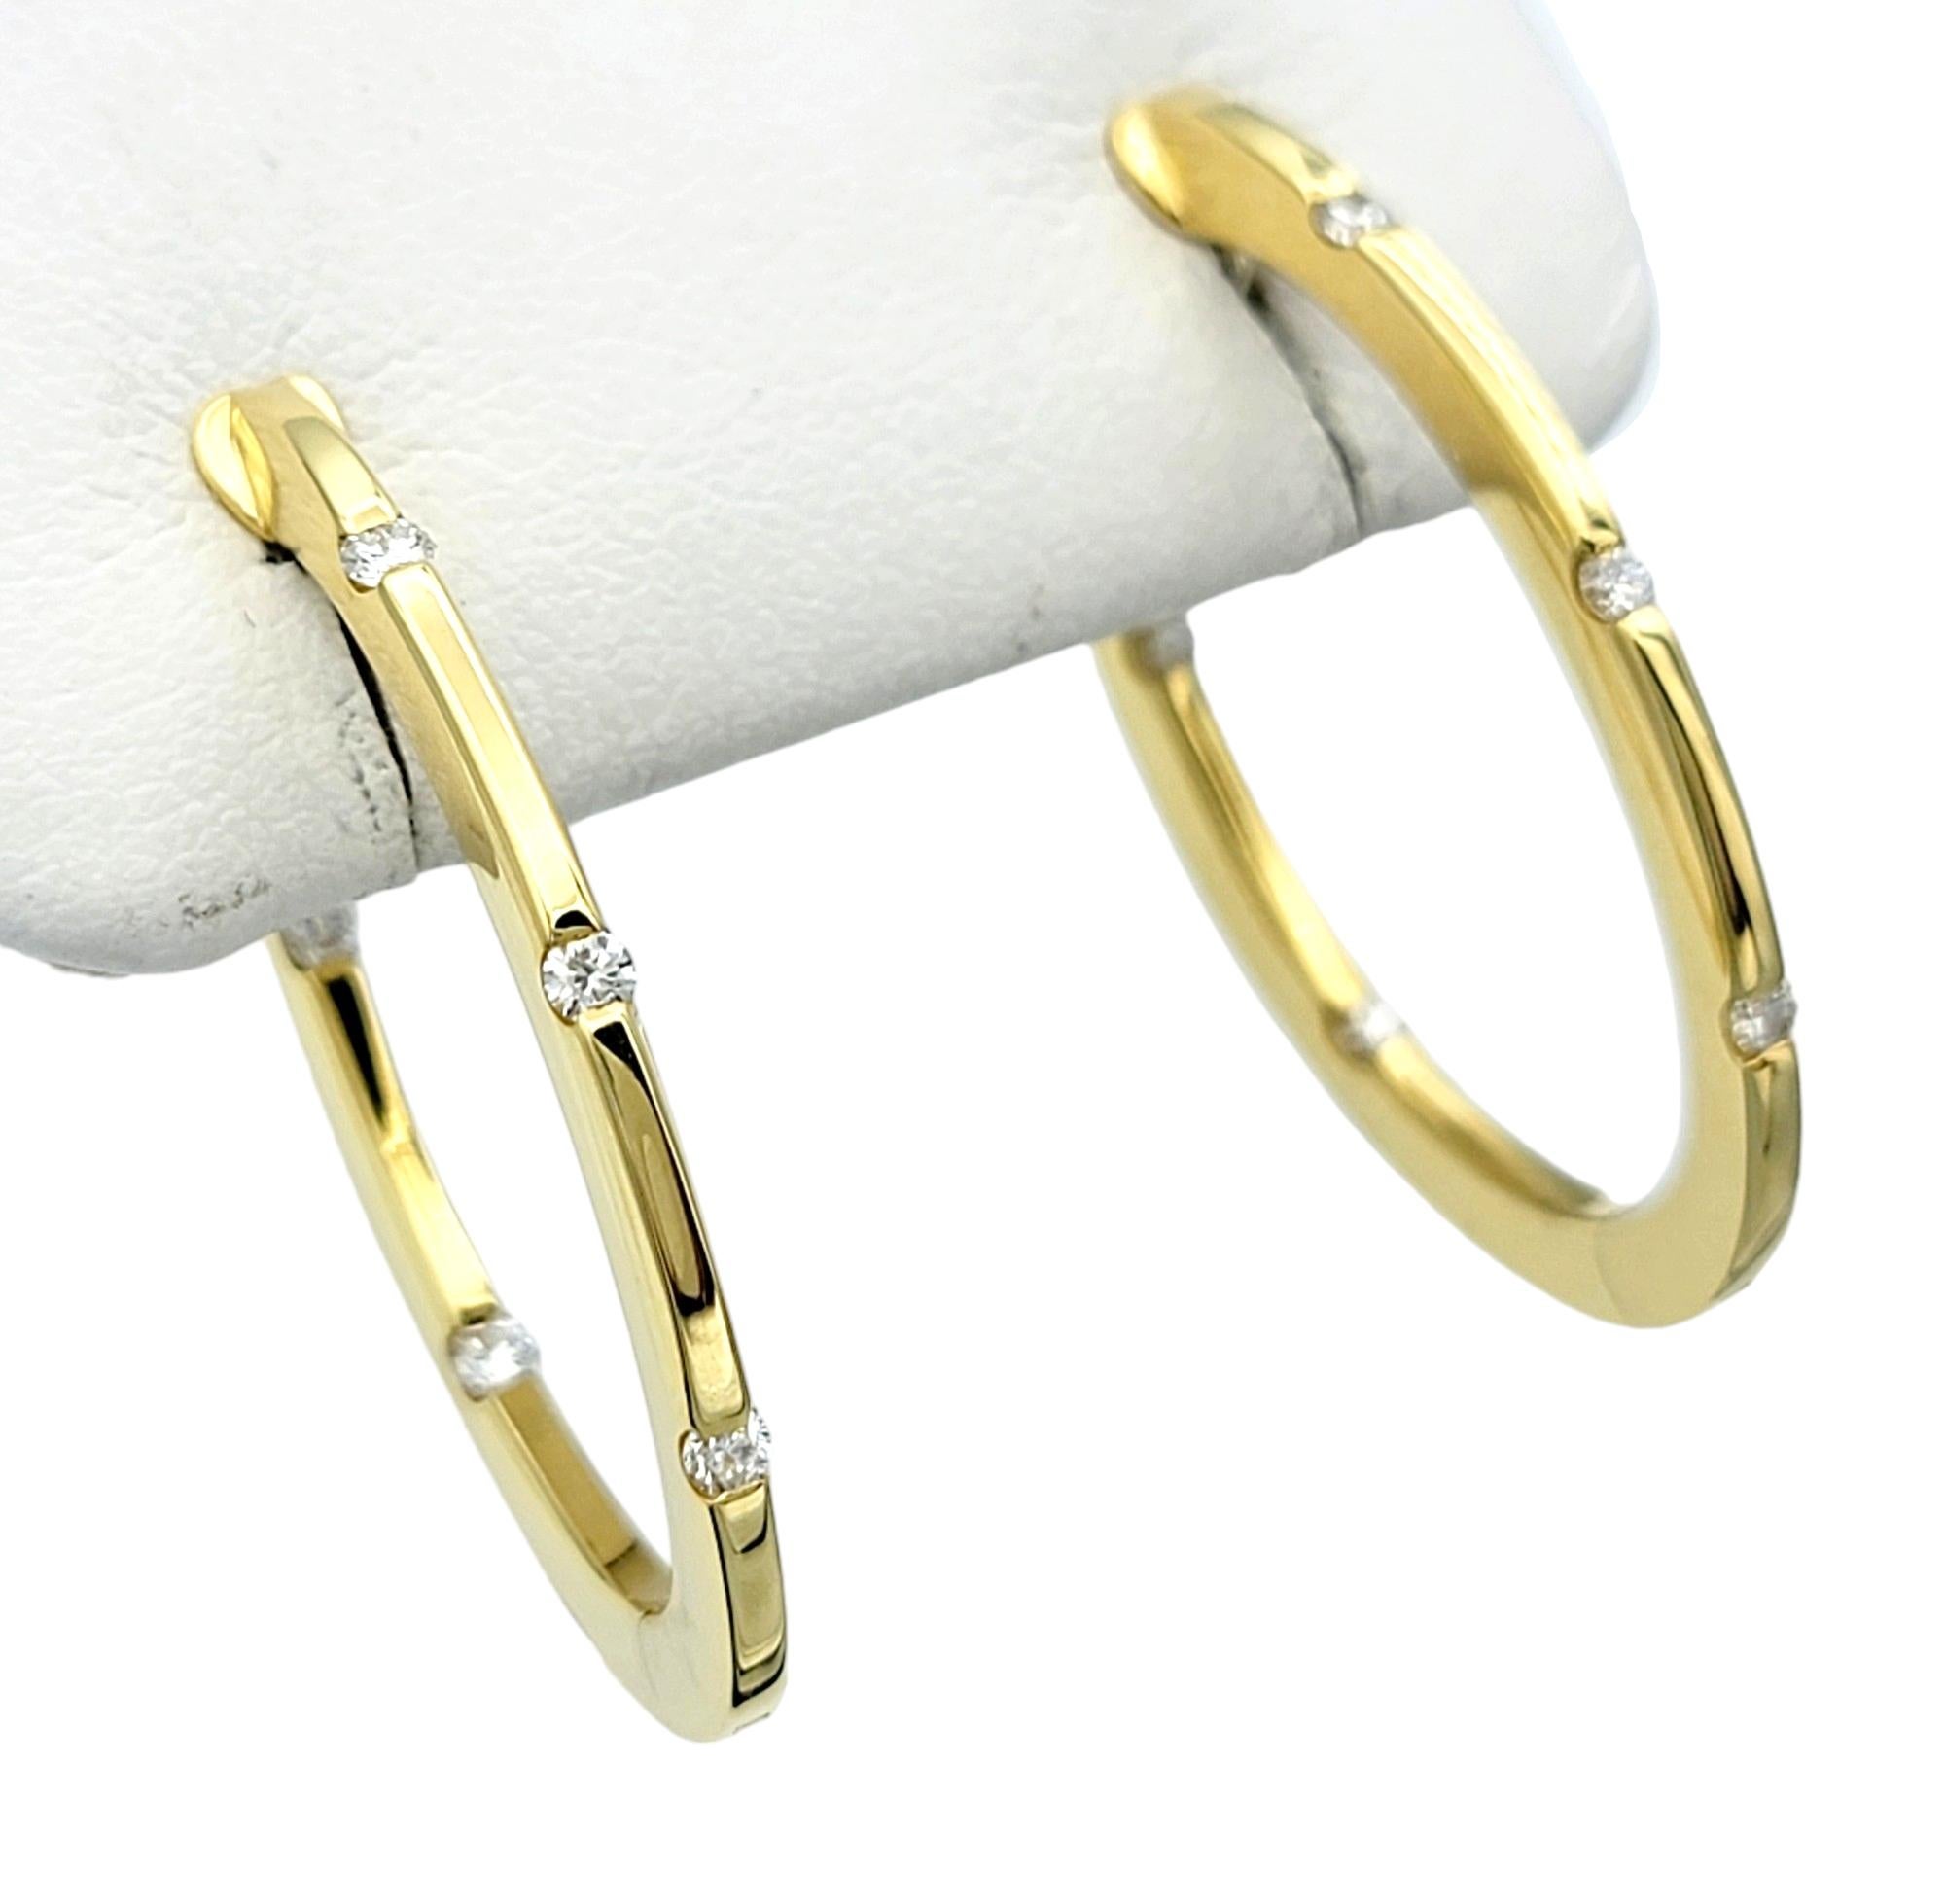 Contemporary Roberto Coin Flat Oval Hoop Earrings with Diamonds Set in 18 Karat Yellow Gold